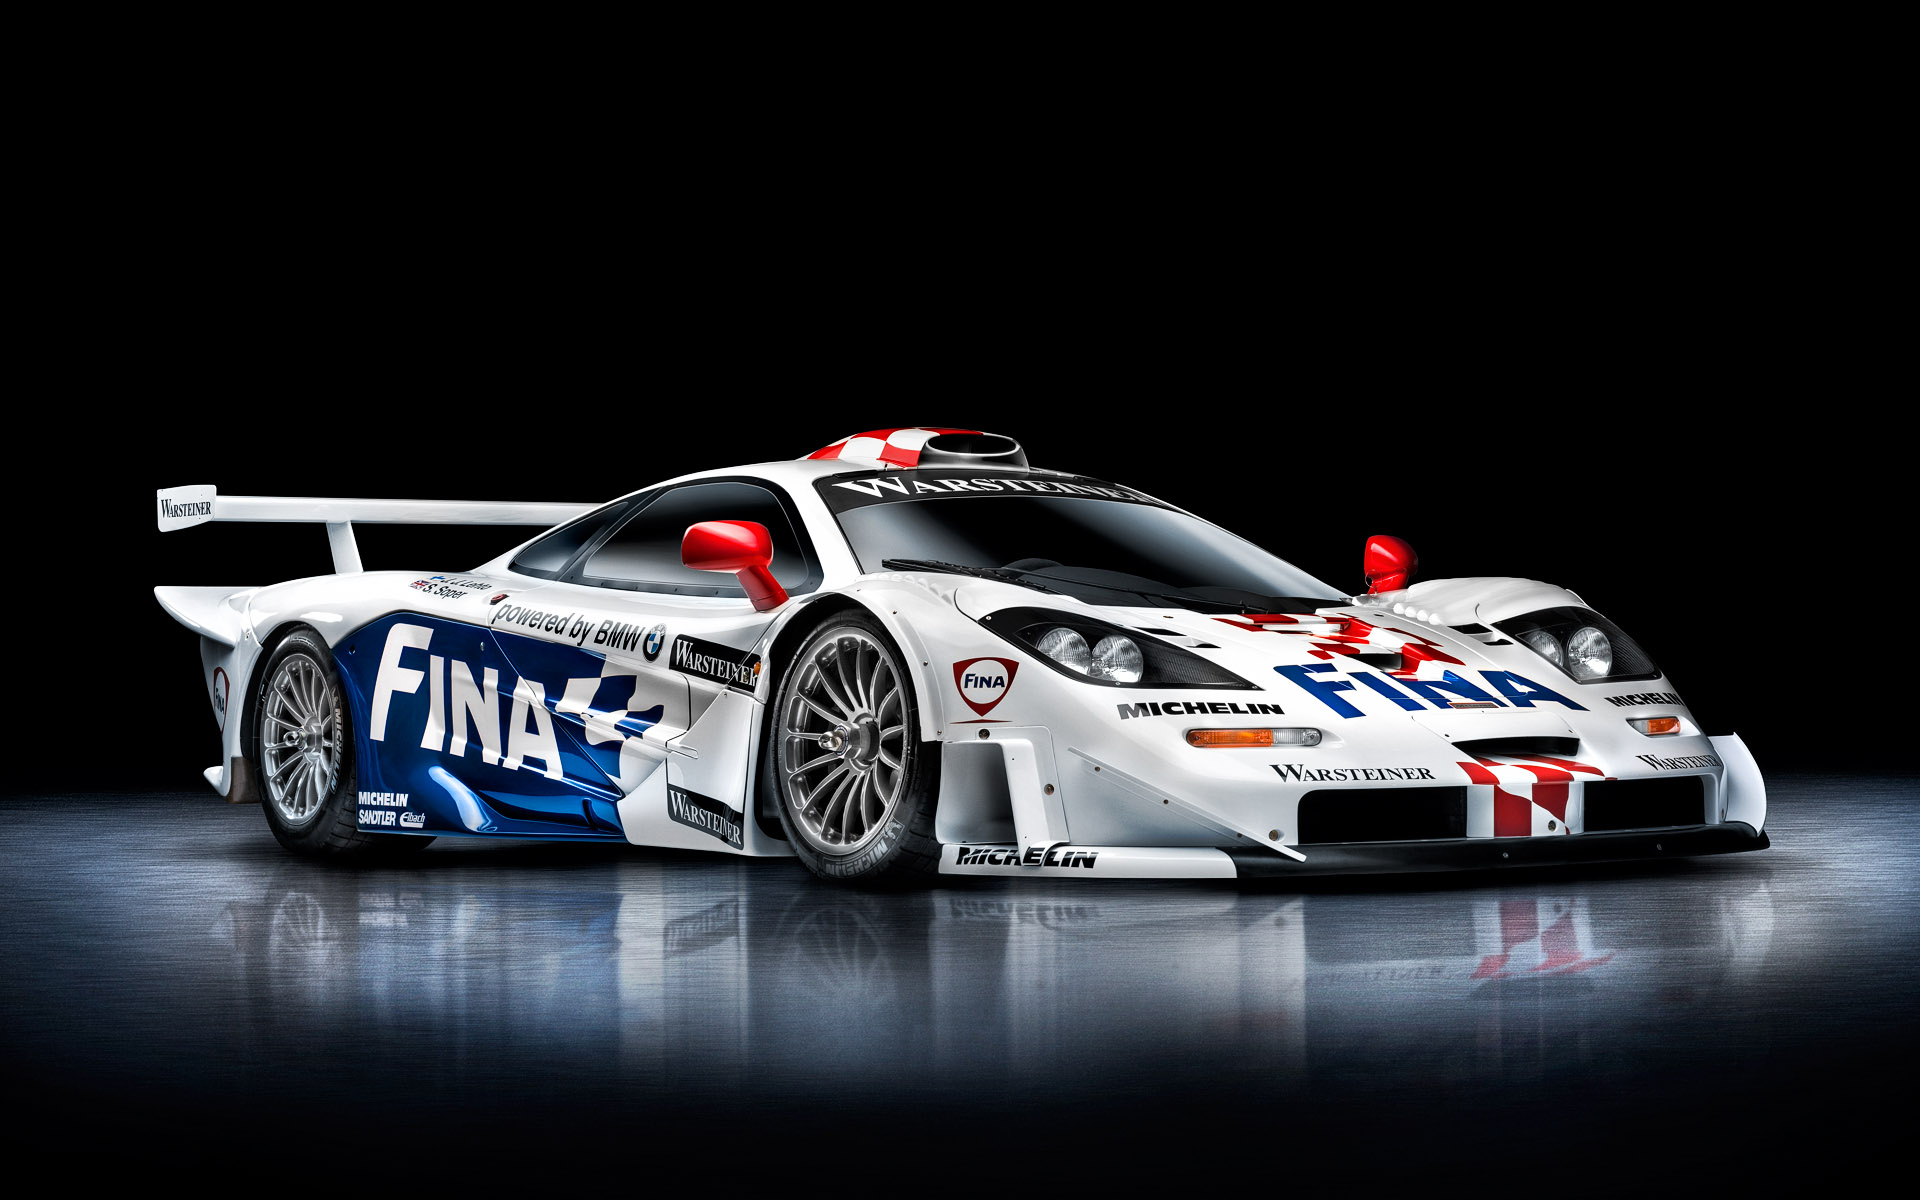 McLaren F1 GTR Longtail photographed by Commercial Photographer Blair Bunting